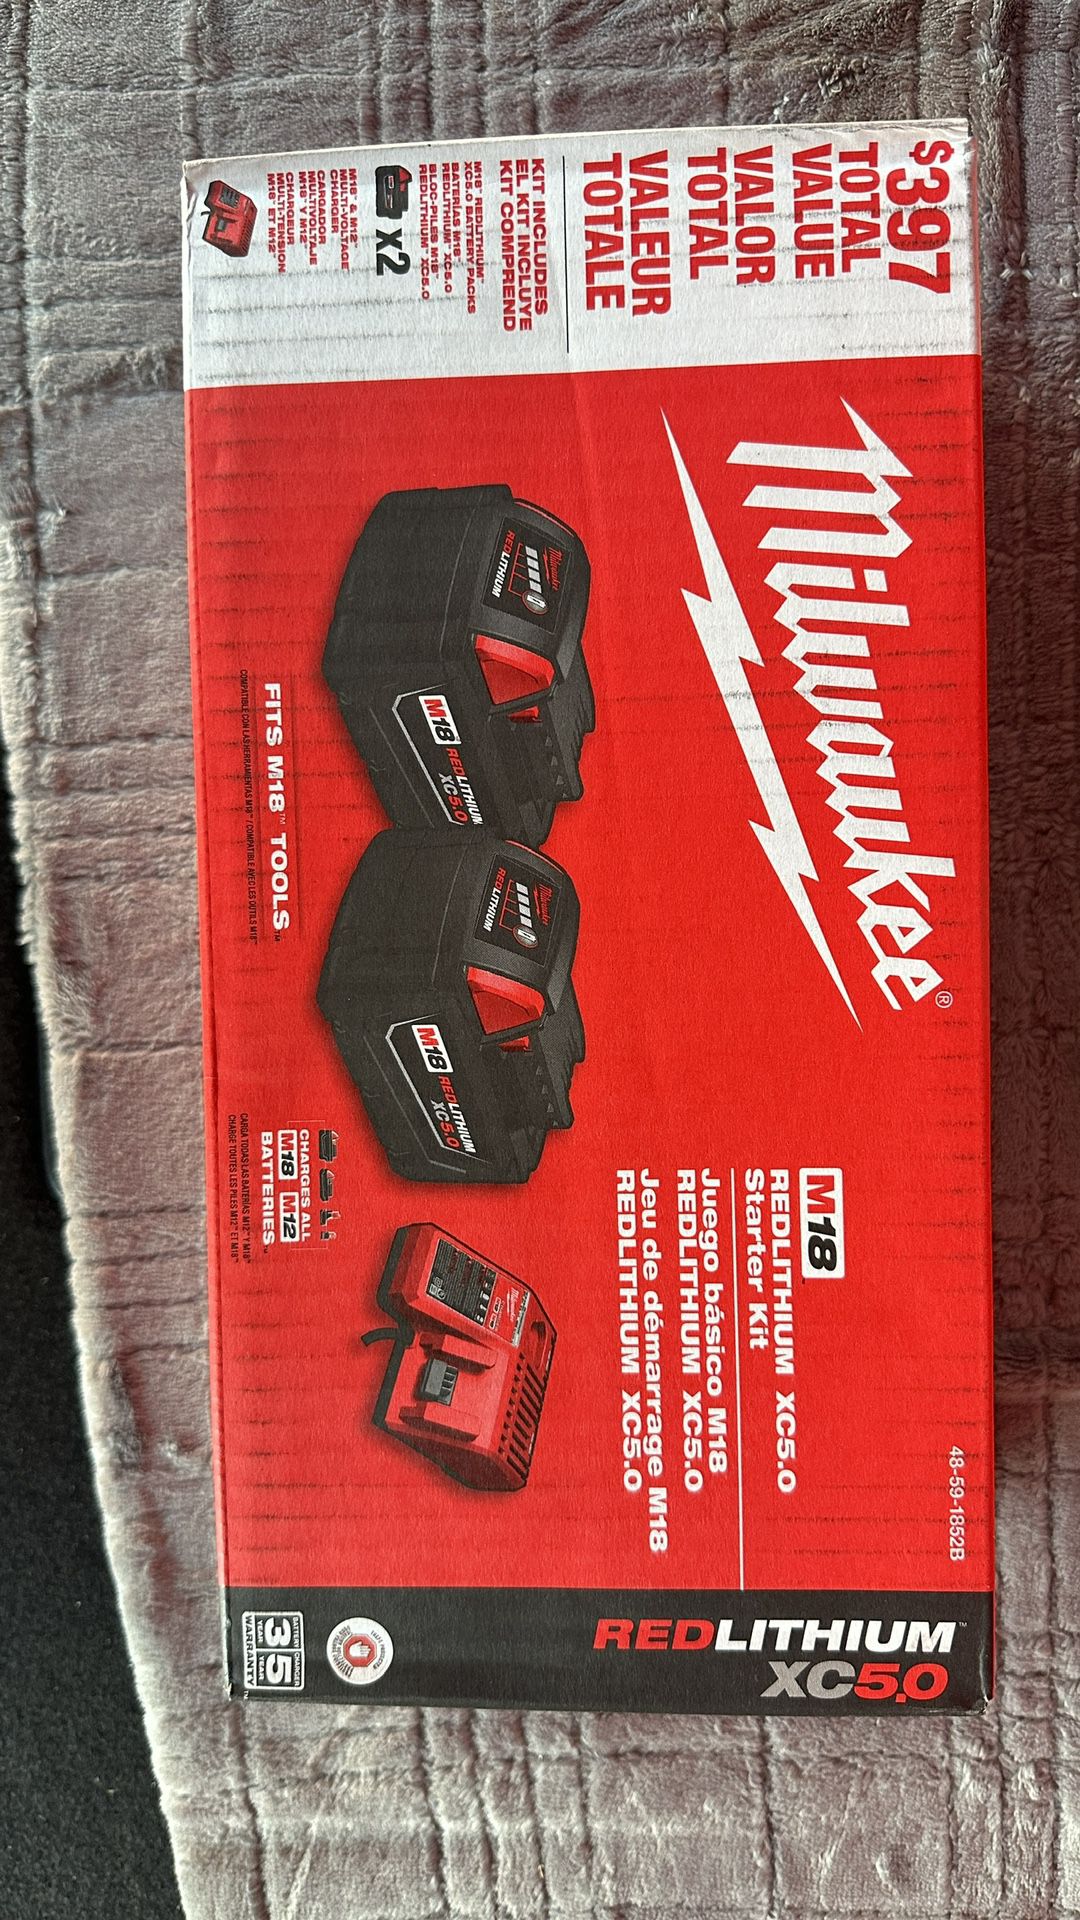 Milwaukee M18  XC Starter Kit with Two 5.0Ah Batteries and Charger